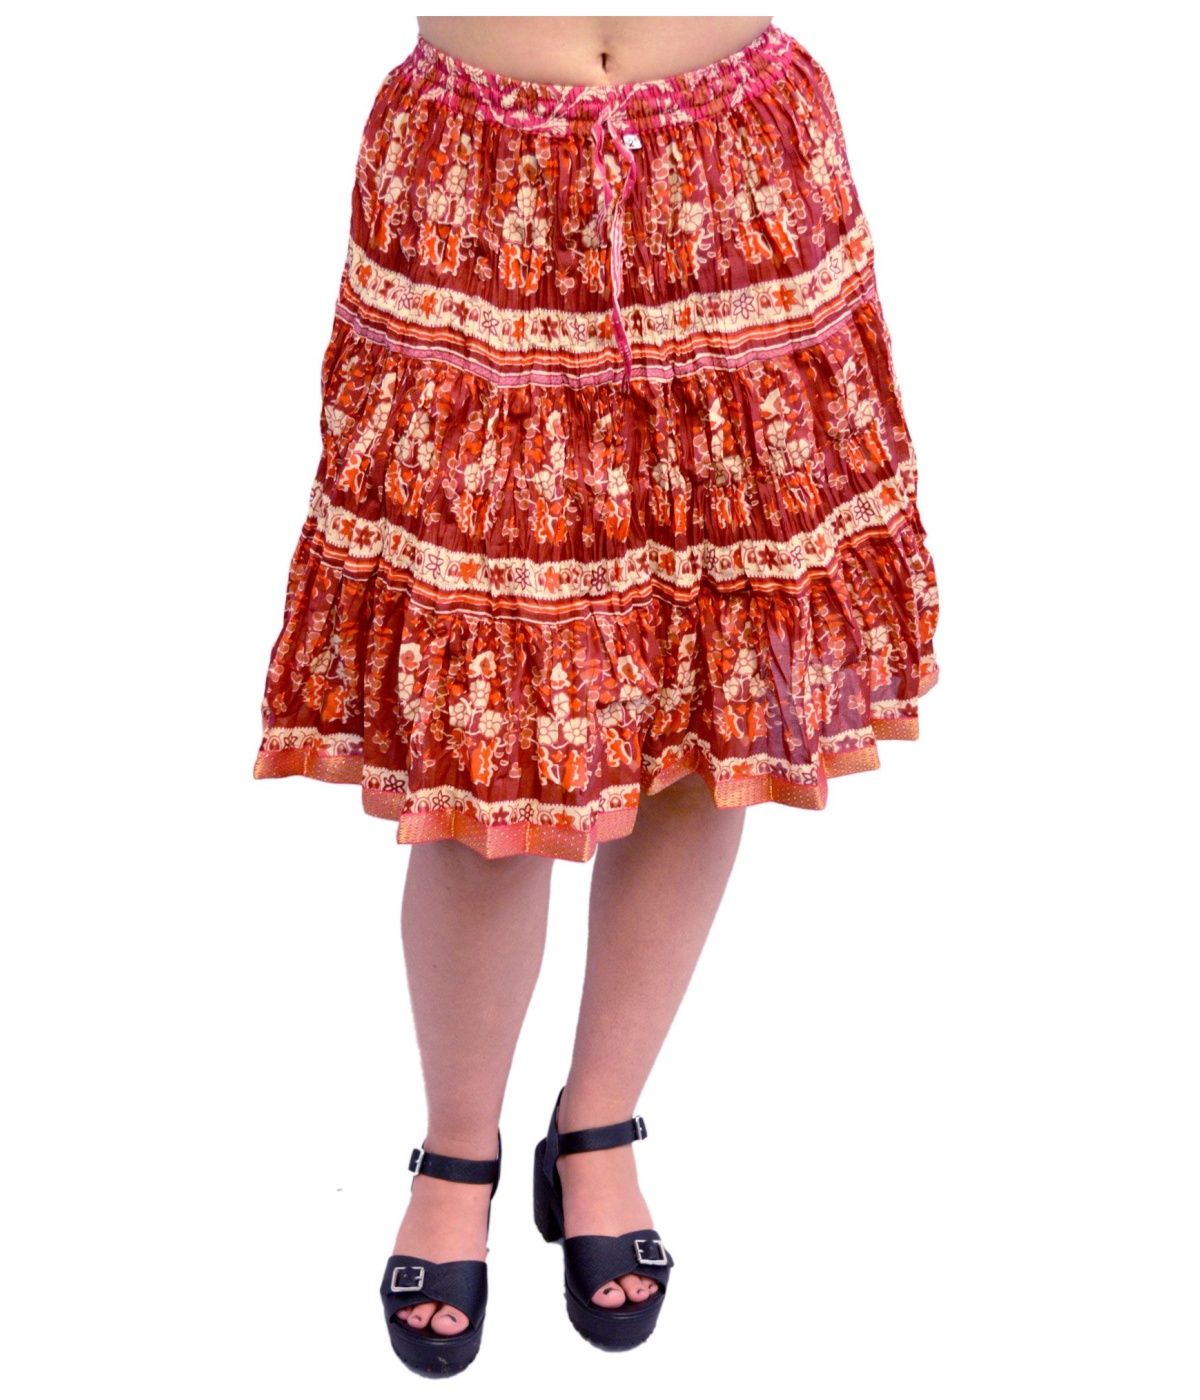 Raspberry Red Cotton Printed Mini Skirt - General Category